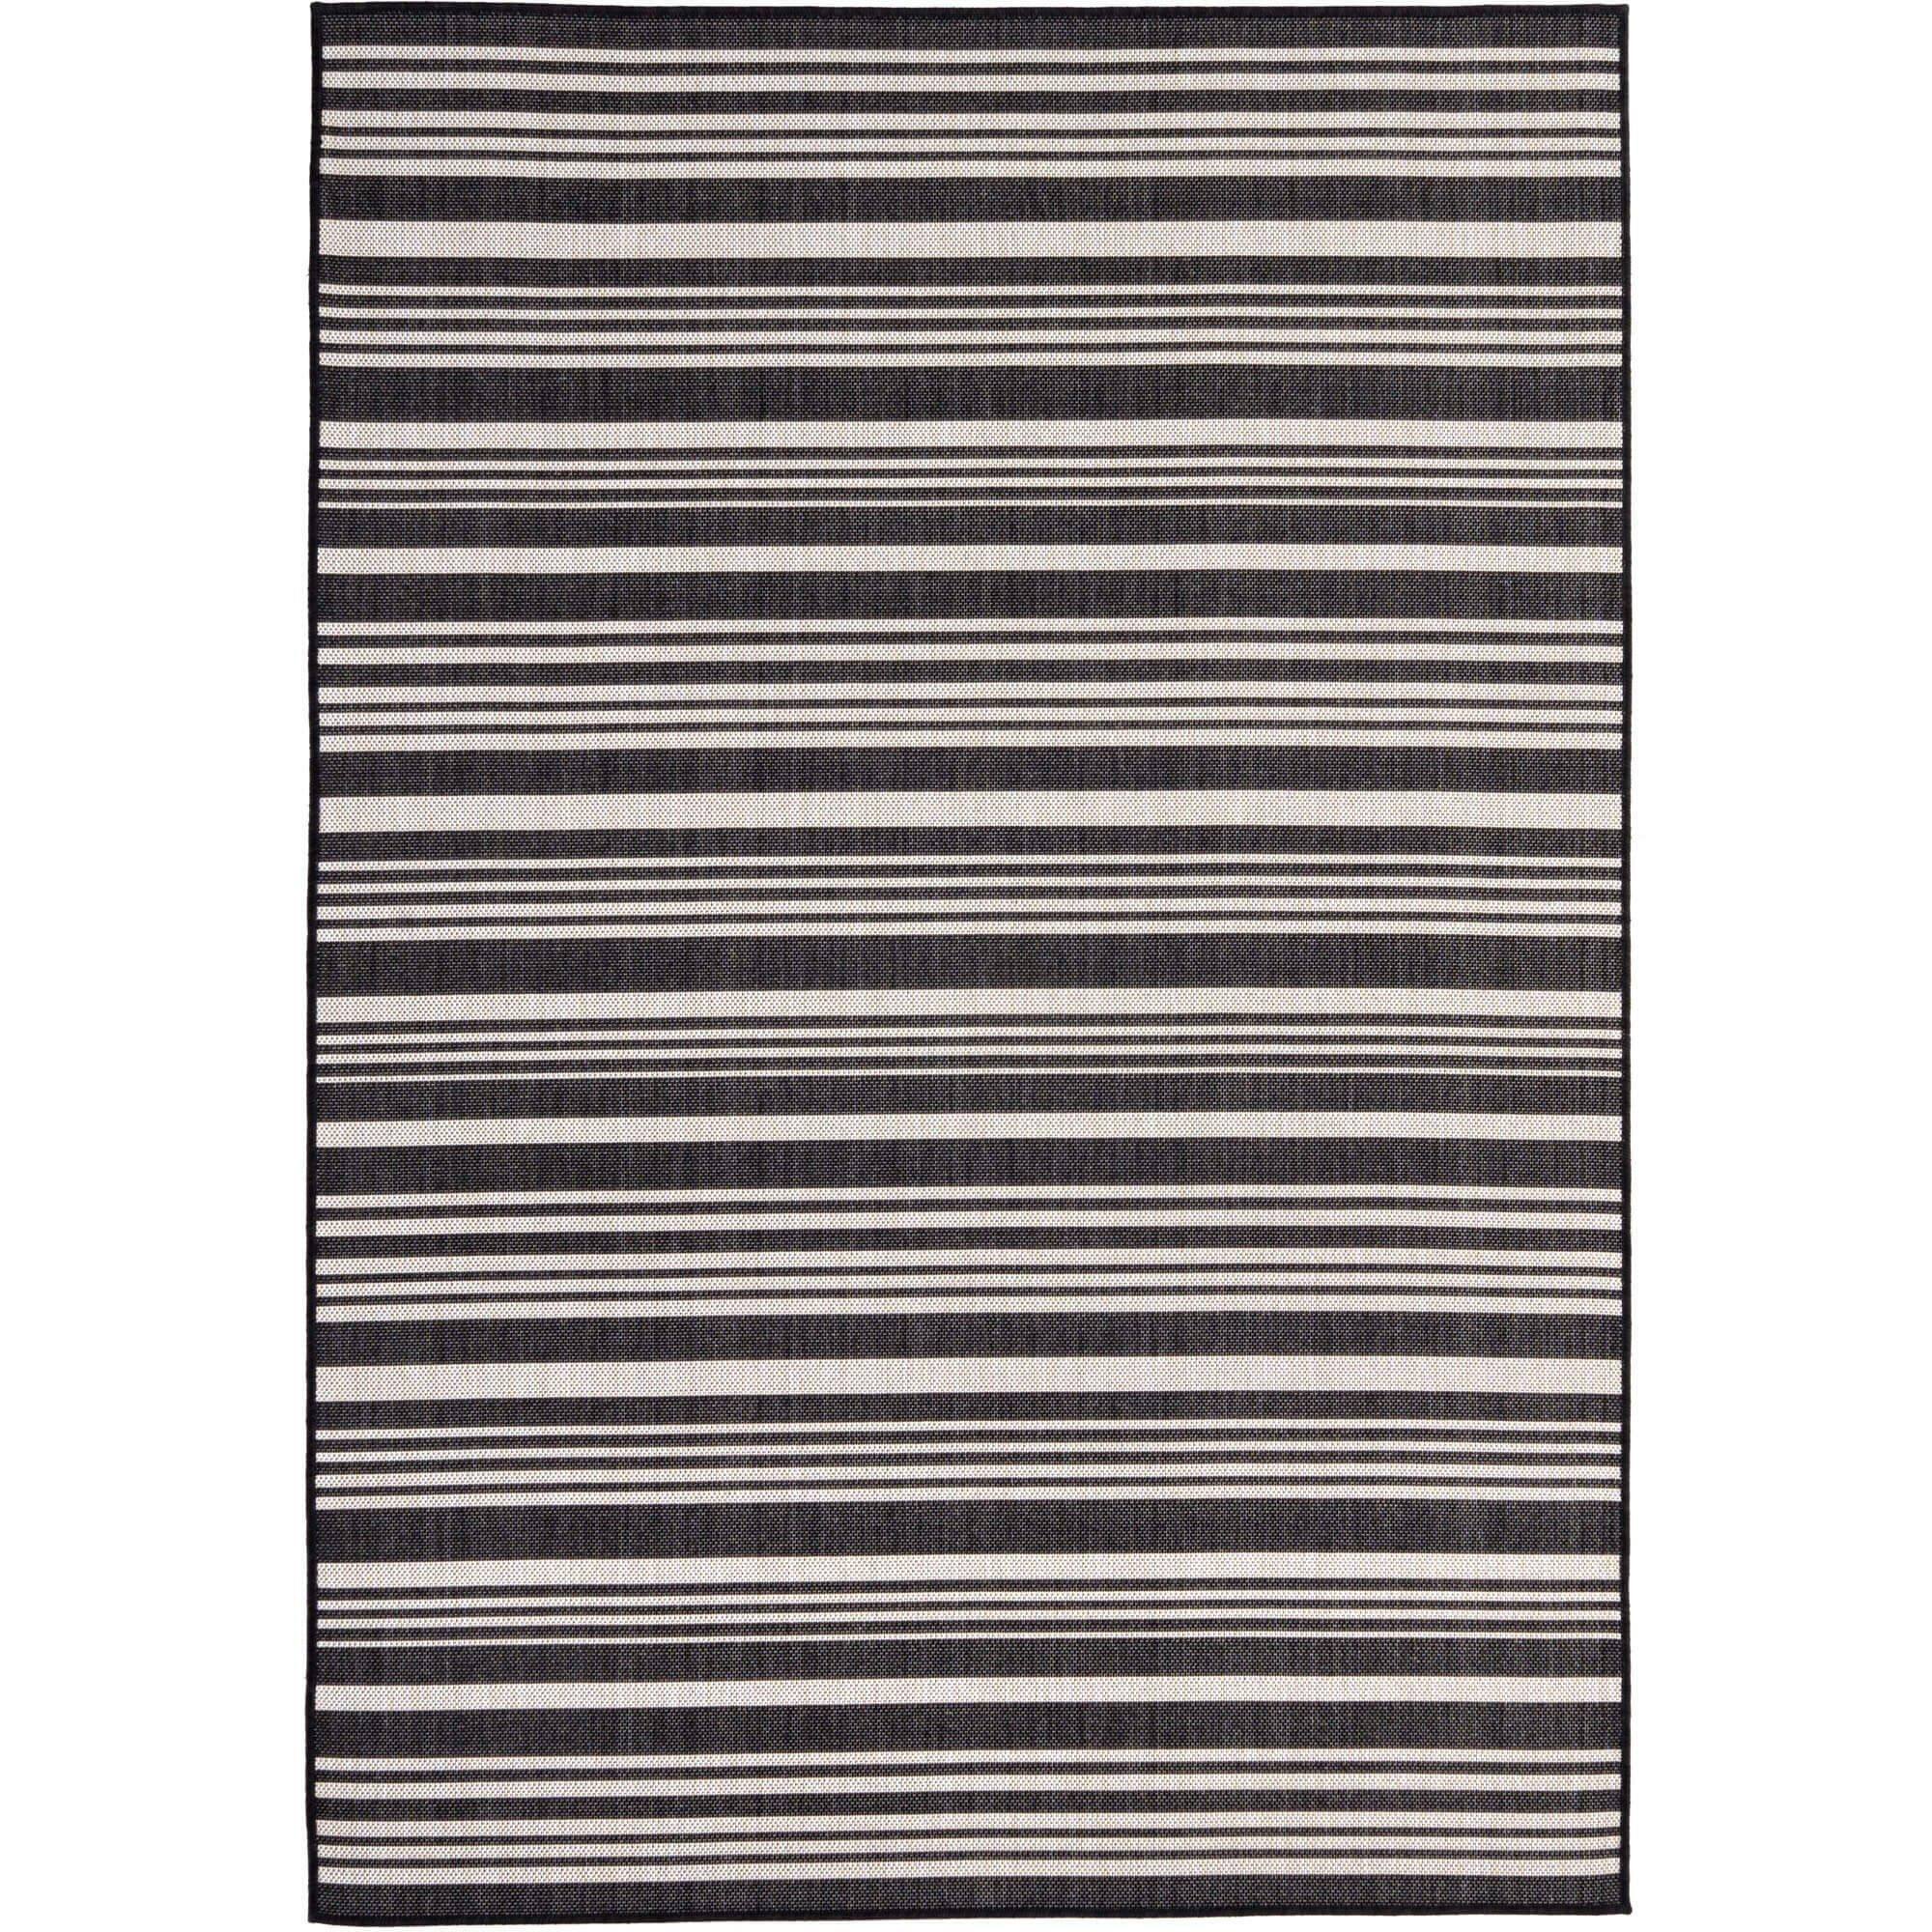 Ecology Collection Outdoor Rugs in Black - 300bl - image 1